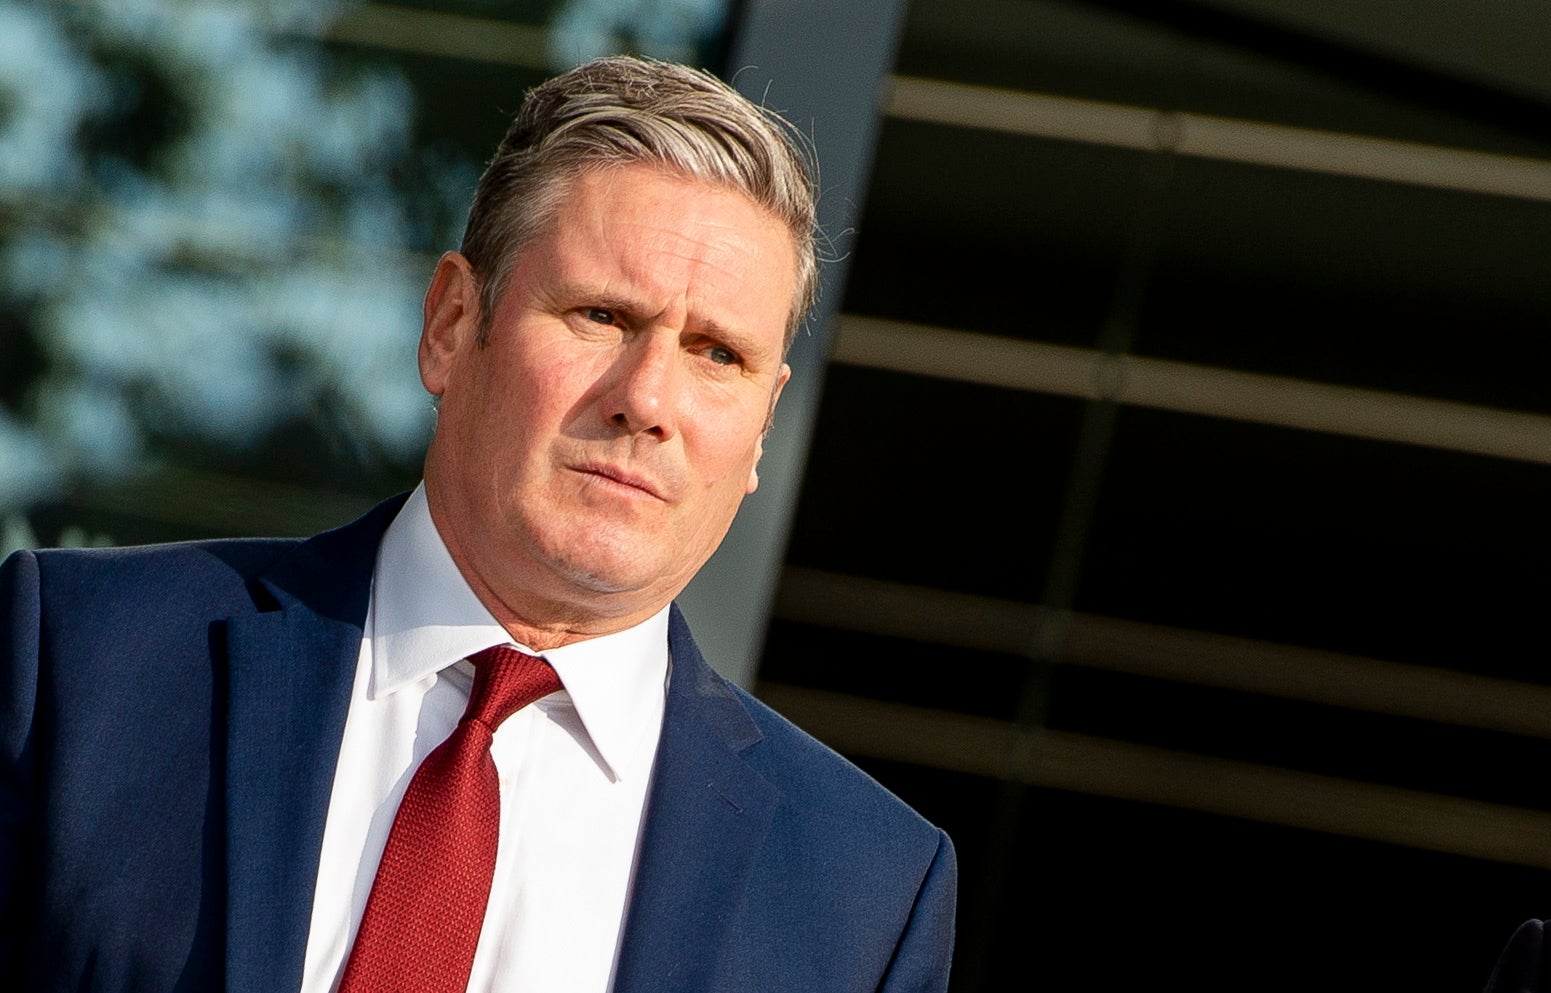 Keir Starmer, after delivering his speech to Labour’s online event